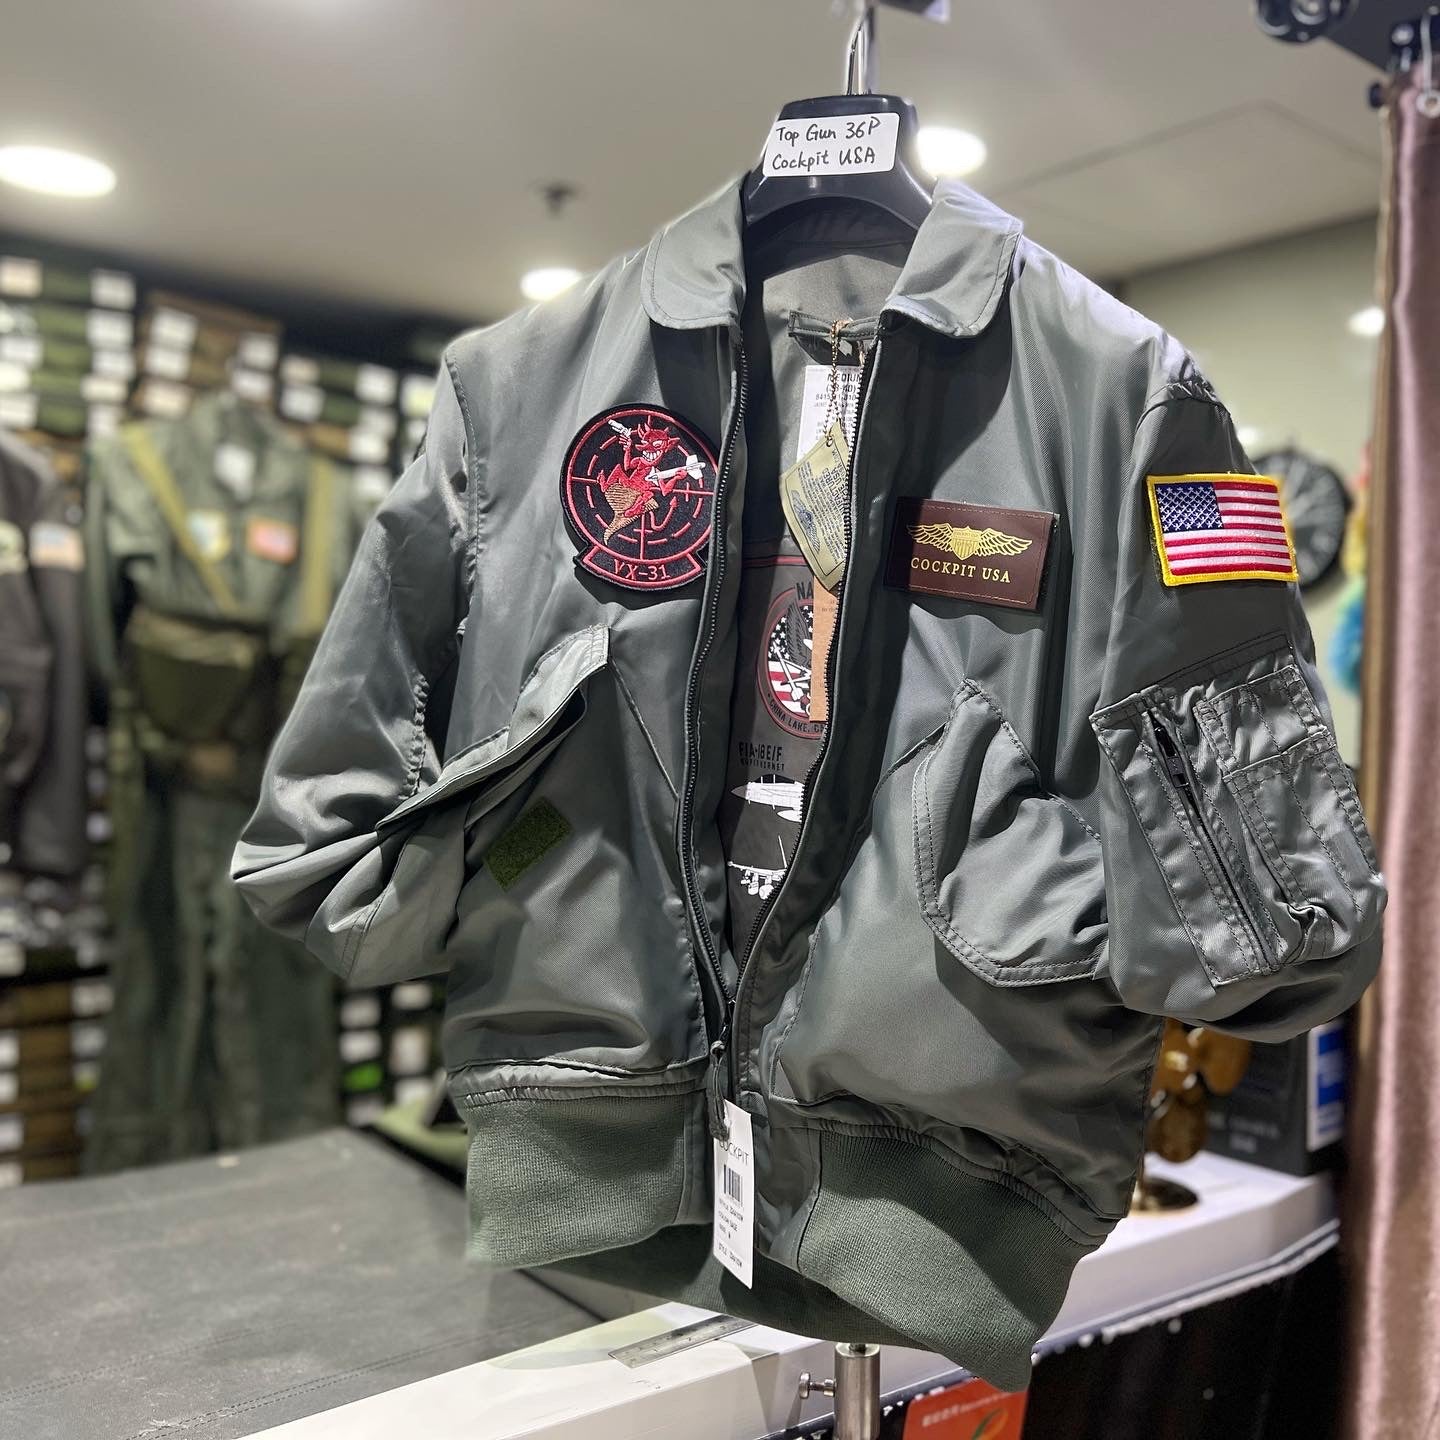 Authentic Top Gun CWU 36P Jacket by Cockpit USA | Official Movie